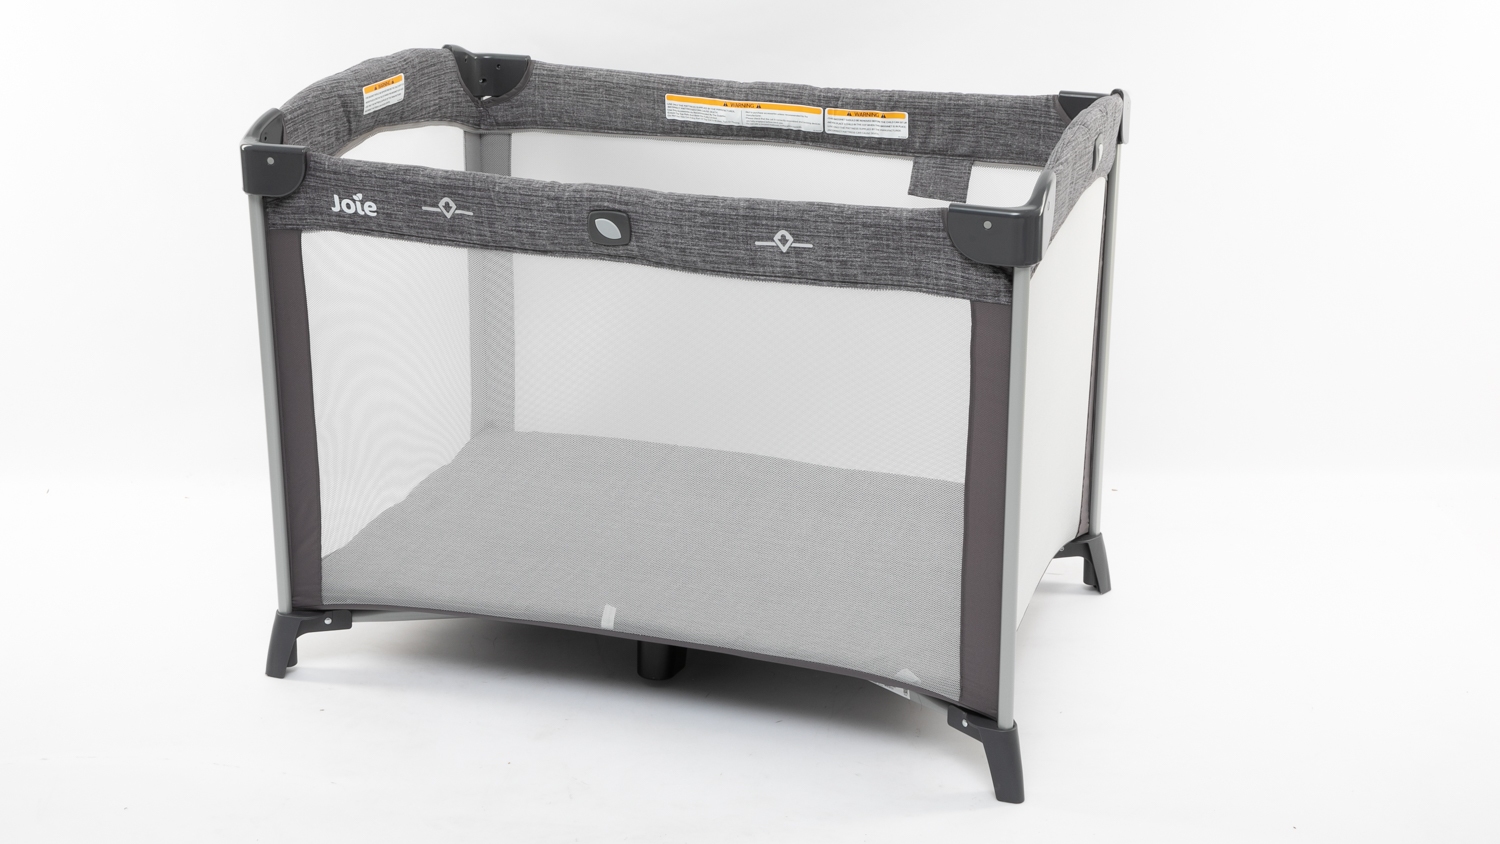 joie travel cot assembly